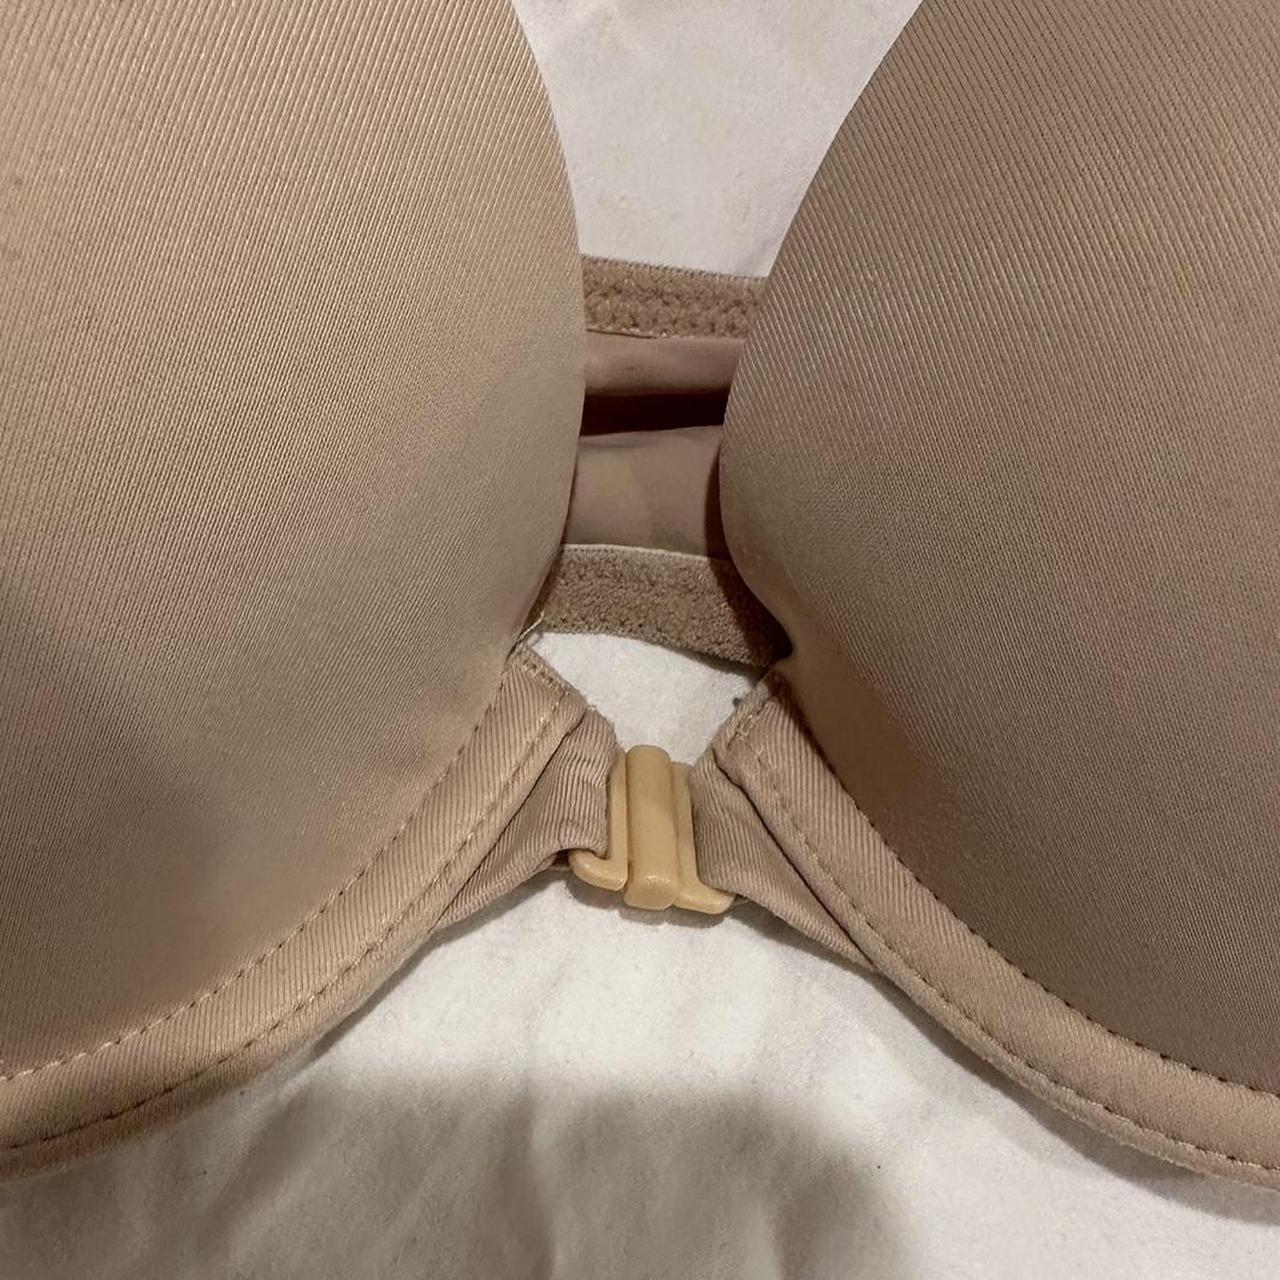 Victoria’s secret PINK 32 C Nude Bra- opens from front